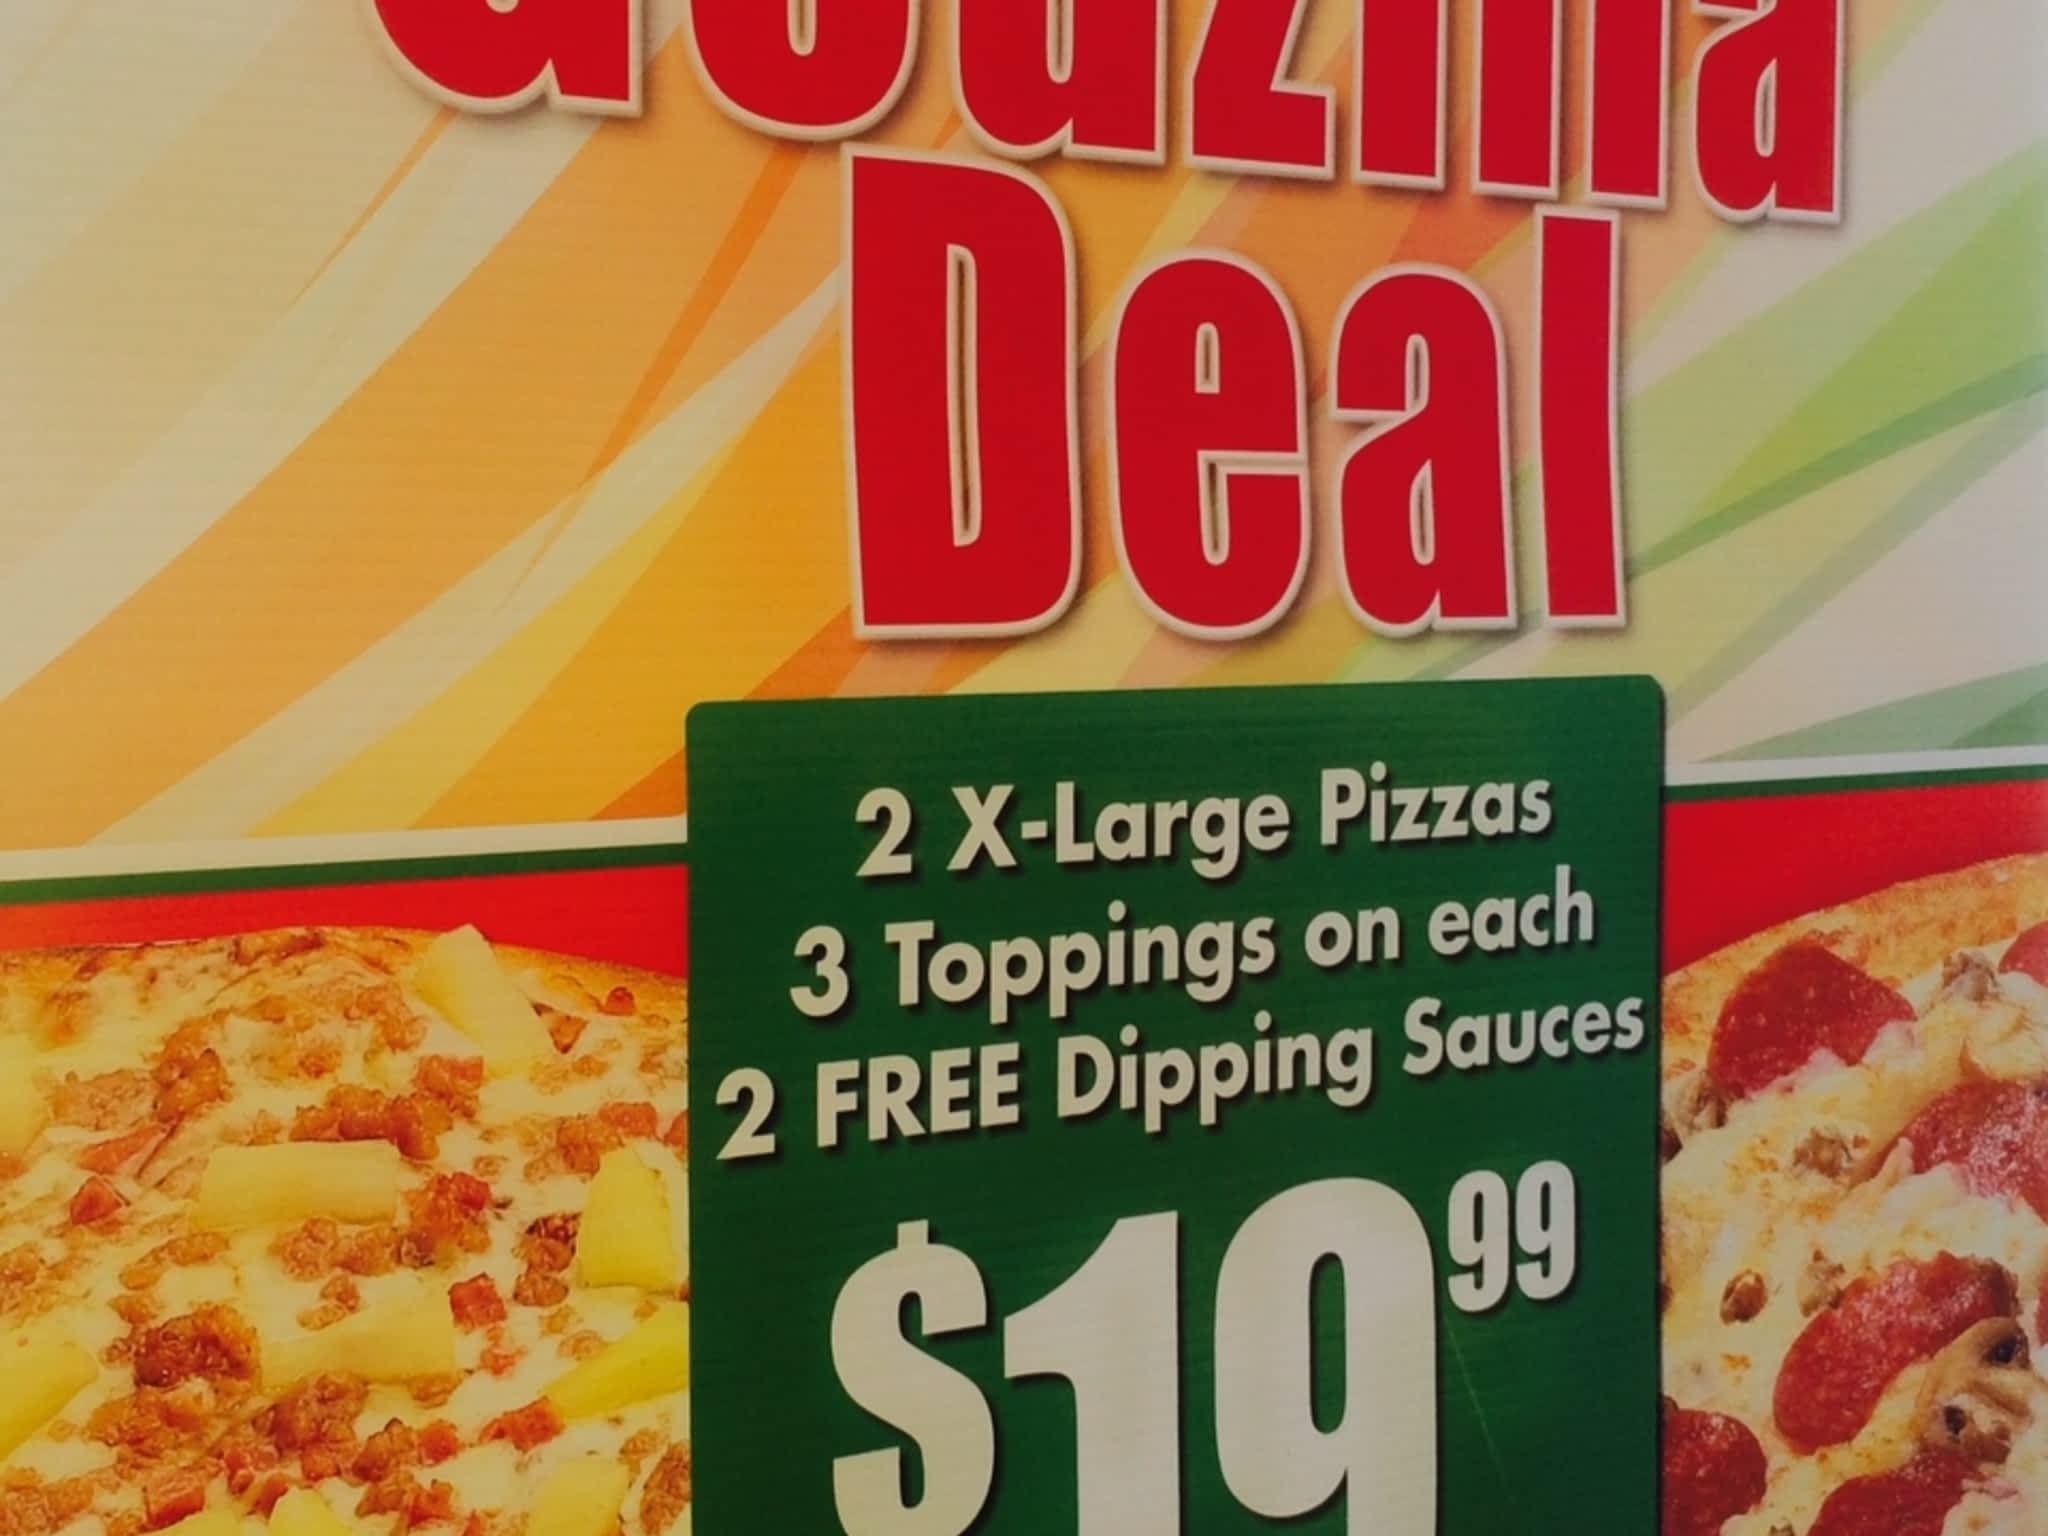 photo Twice The Deal Pizza